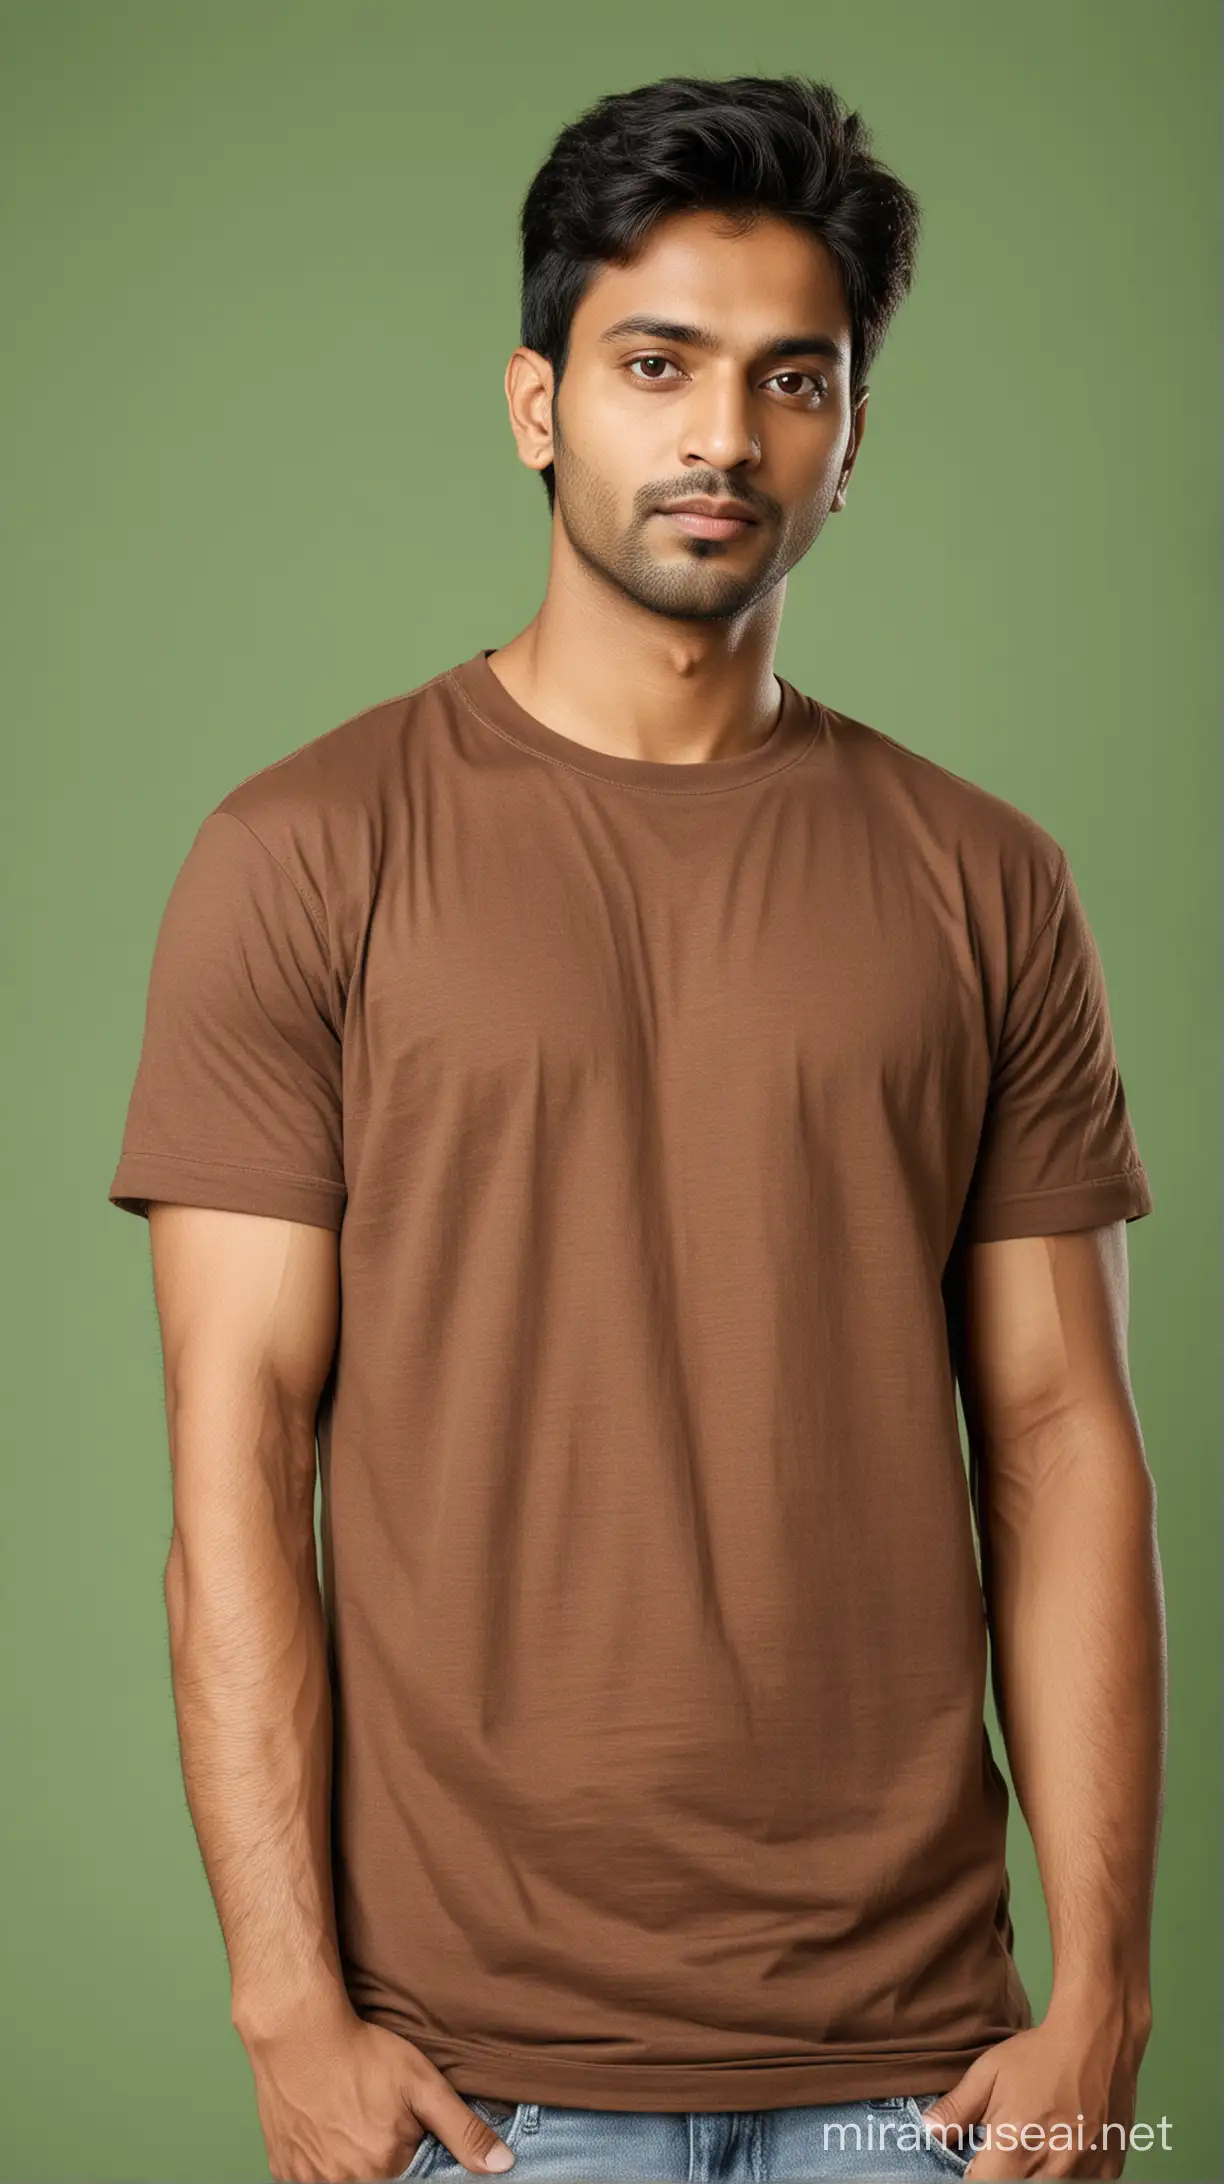 Indian men who is criminal , also hi is look in brown t shirt , green background  